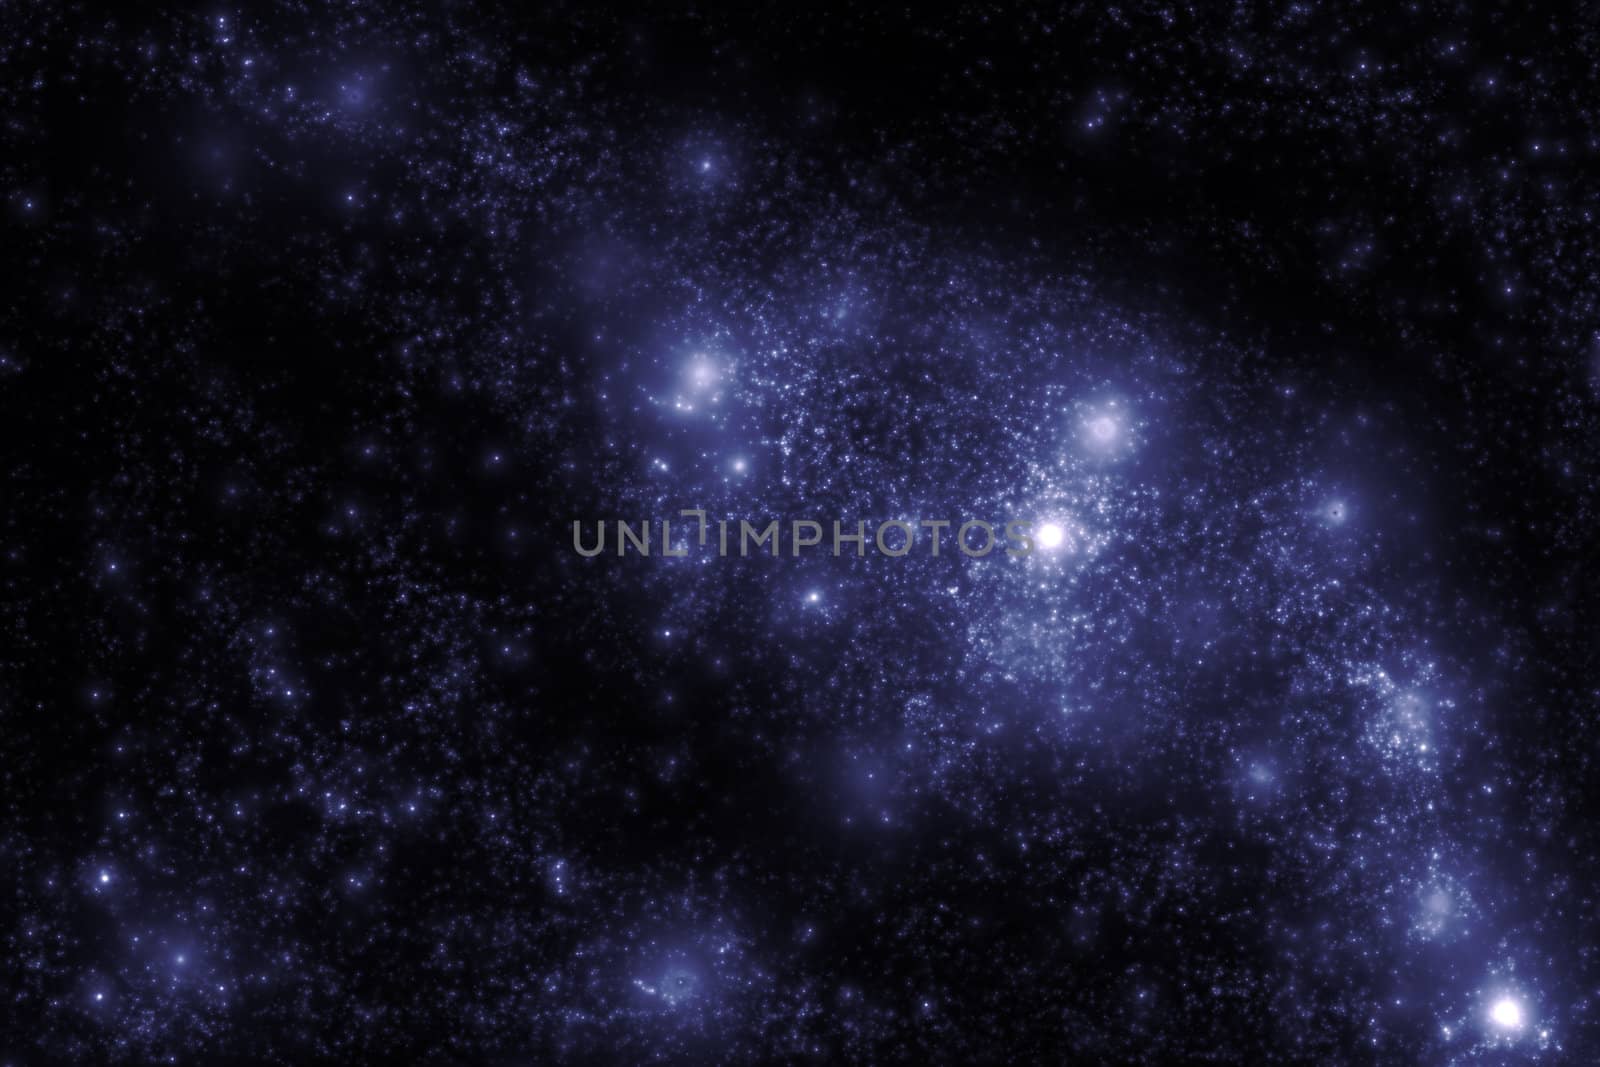 Image of stars and nebula clouds in deep space - abstract background of starfield universe